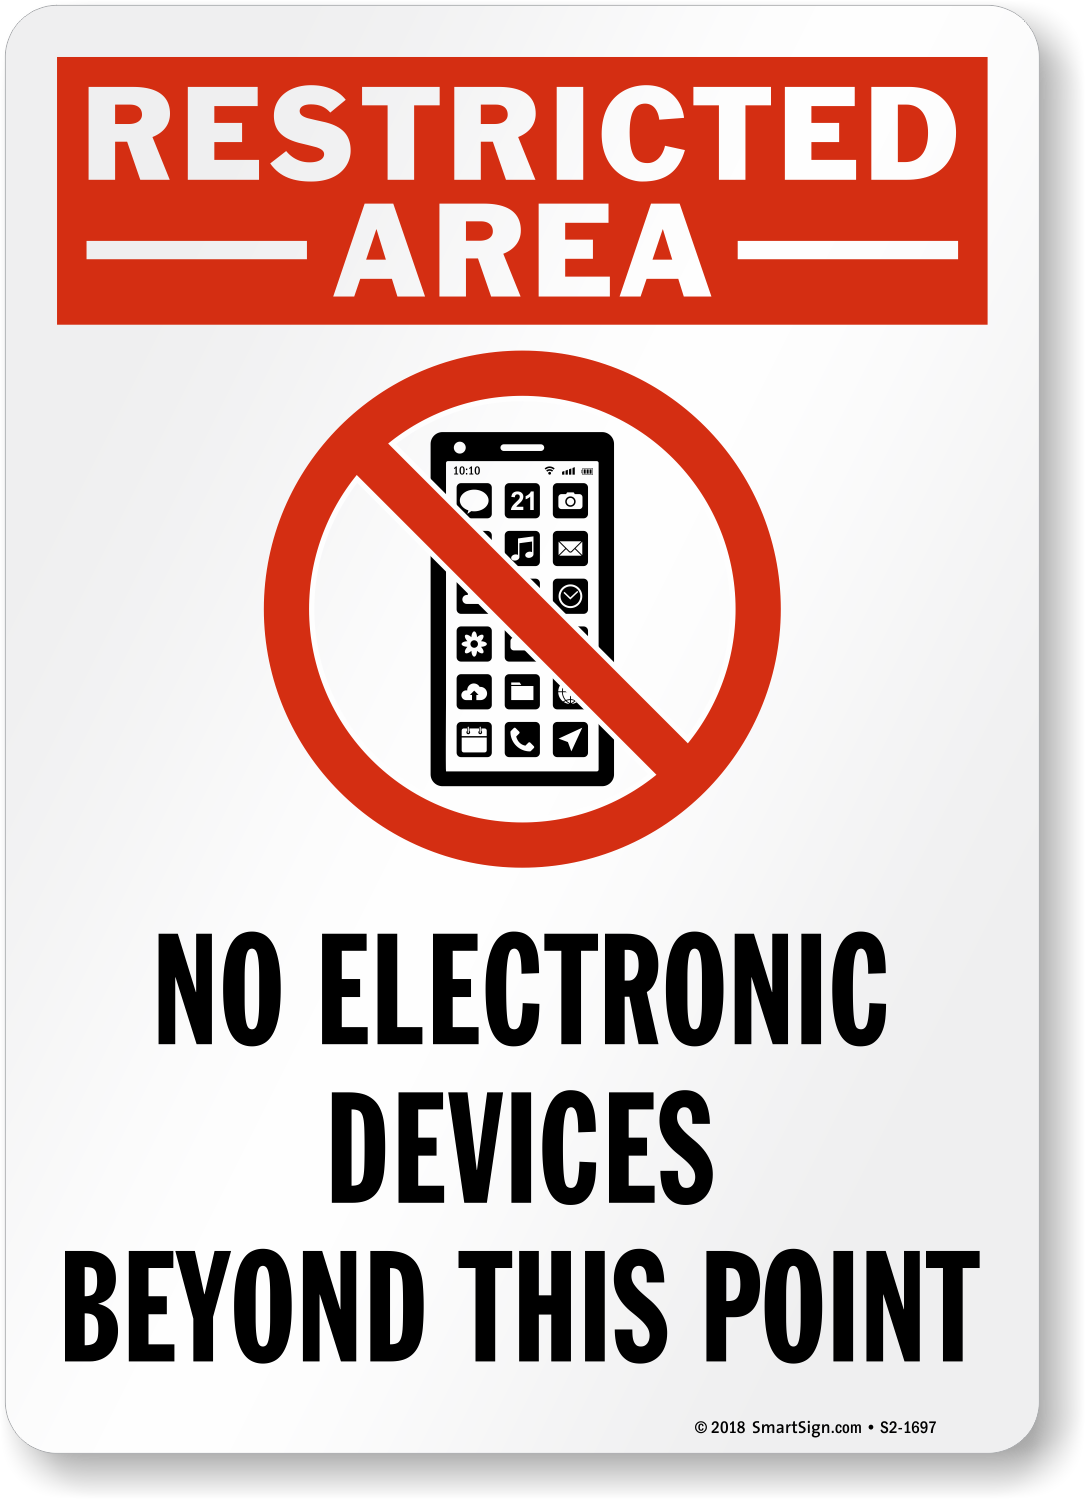 Restricted Area No Electronic Devices Sign, SKU S21697